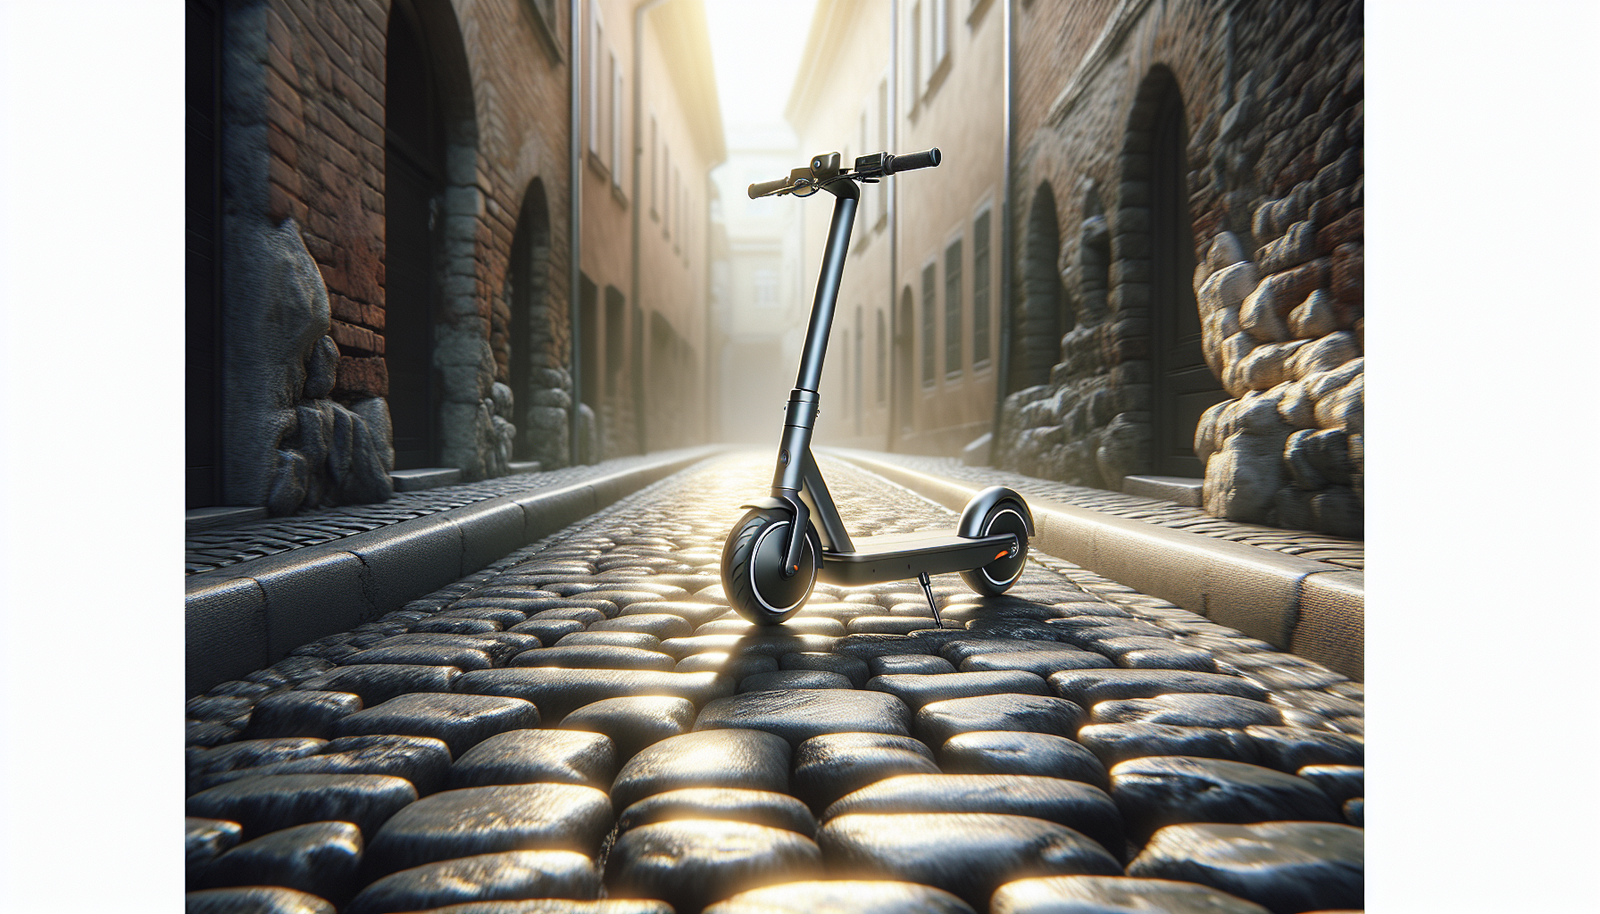 Can I Ride My Electric Scooter On Uneven Surfaces, Like Cobblestone Or Gravel?